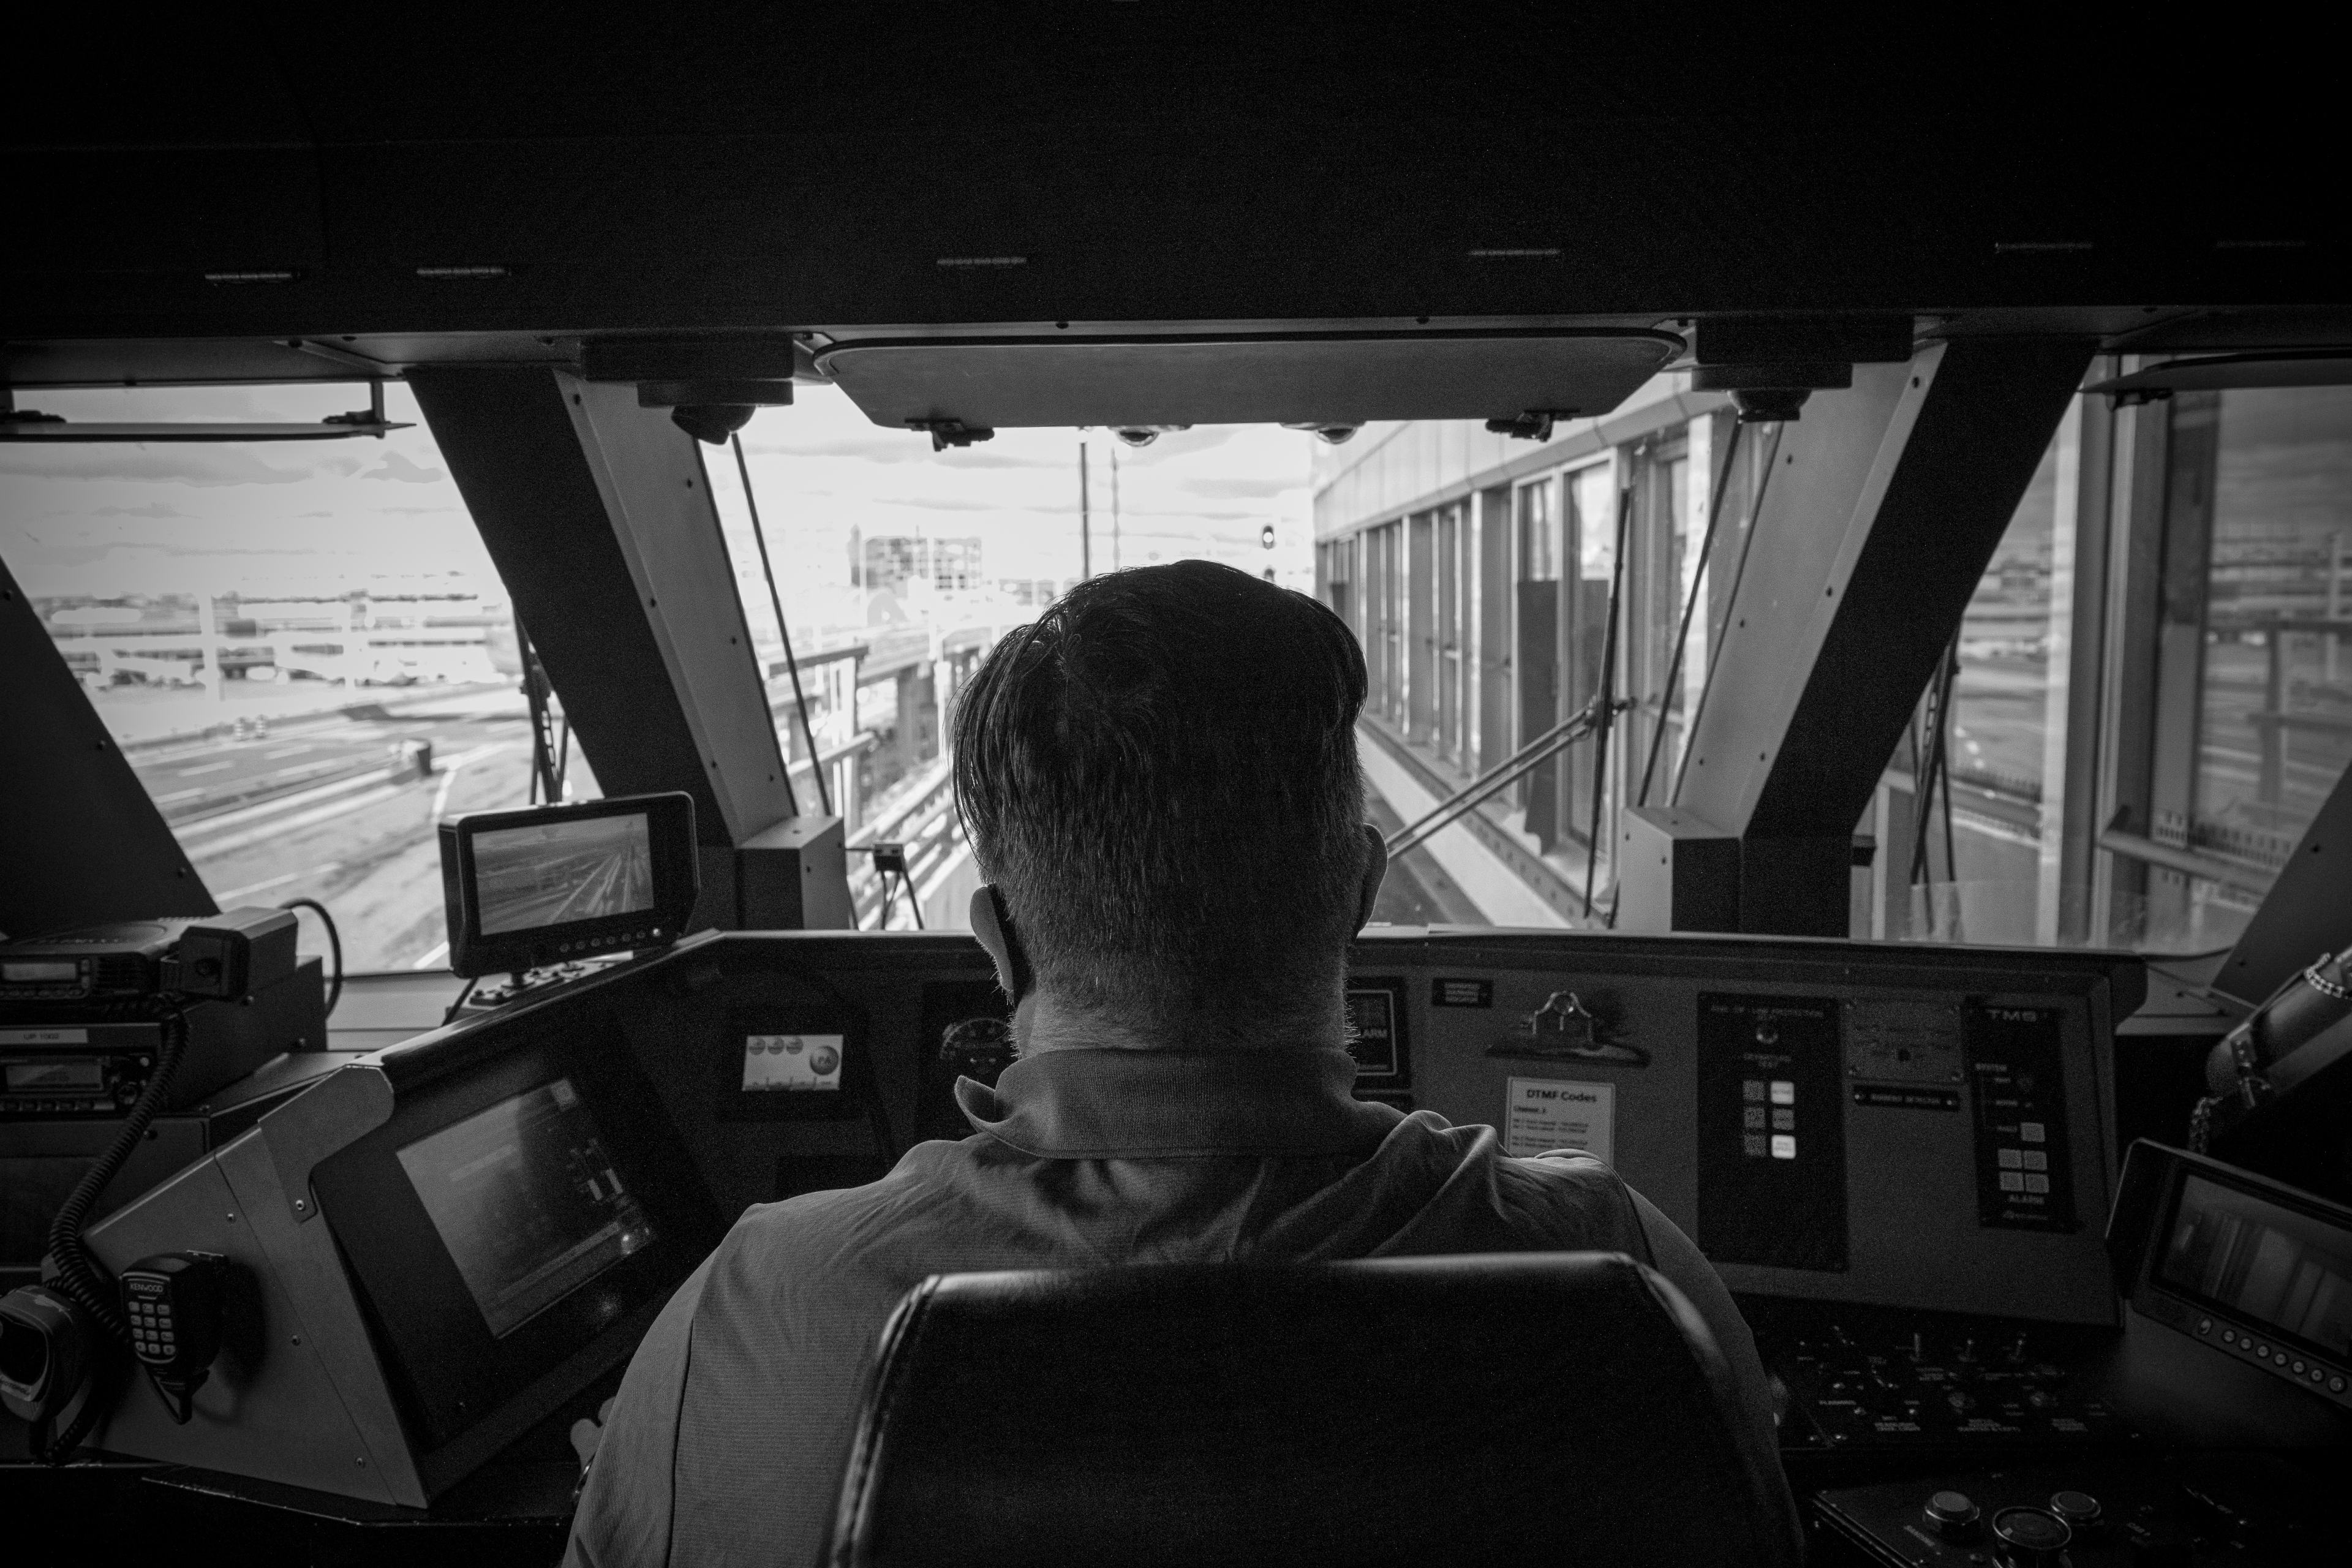 A man sits at the controls of an UP vehicle.